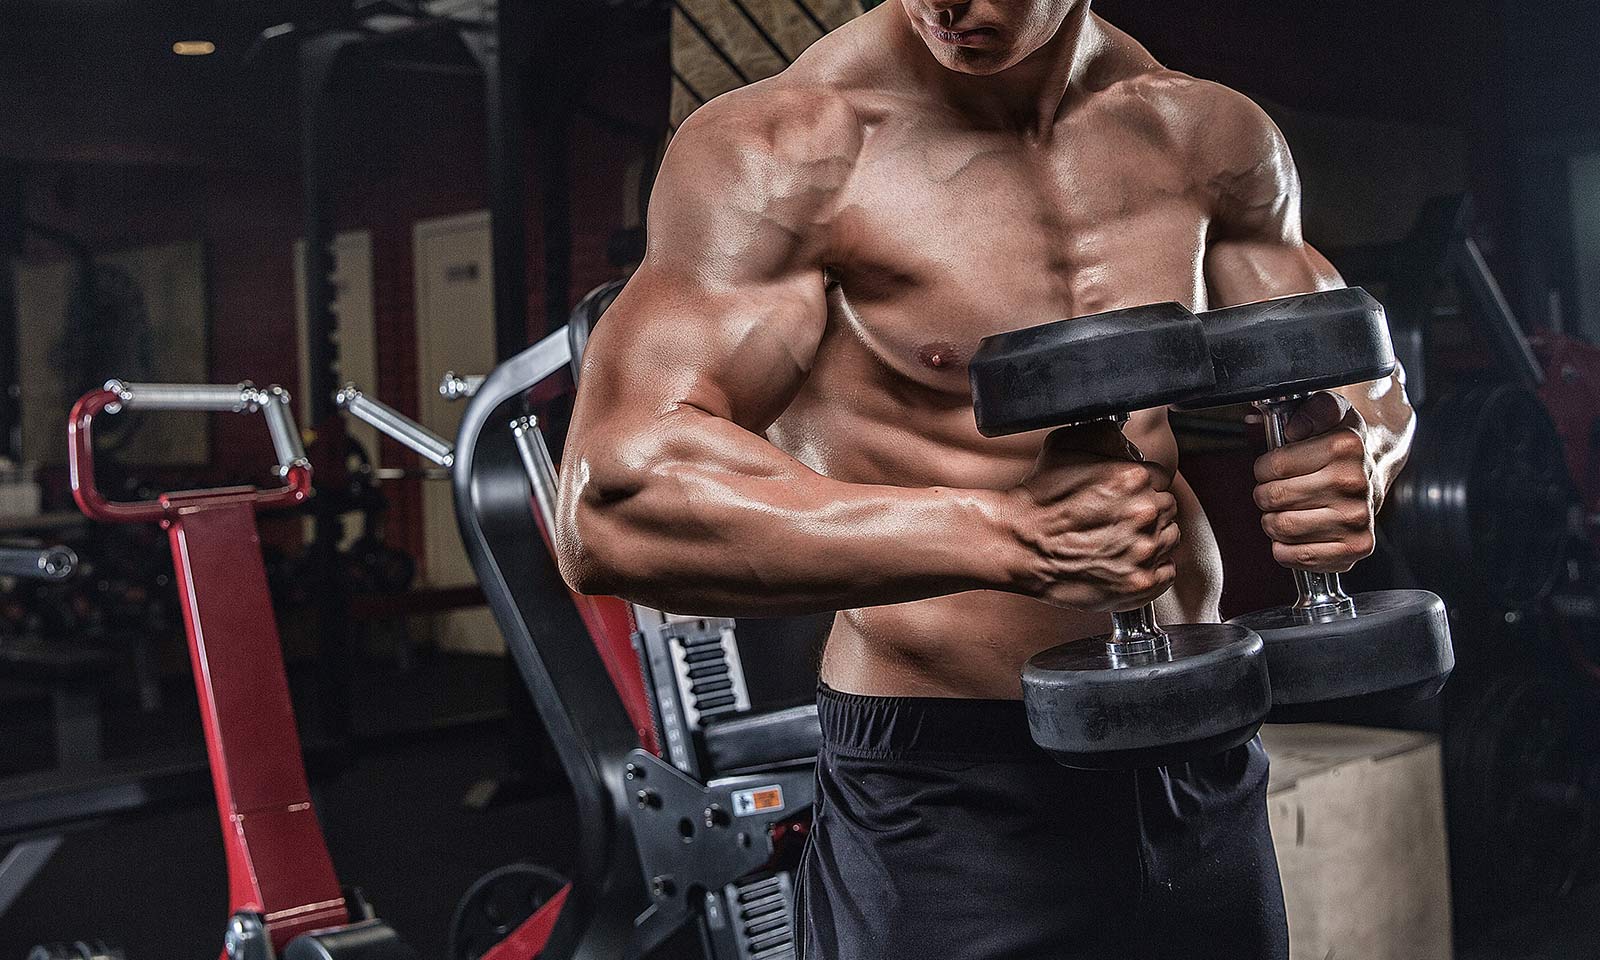 6 Ridiculous Bro Science Fitness Myths You Need to Stop Believing